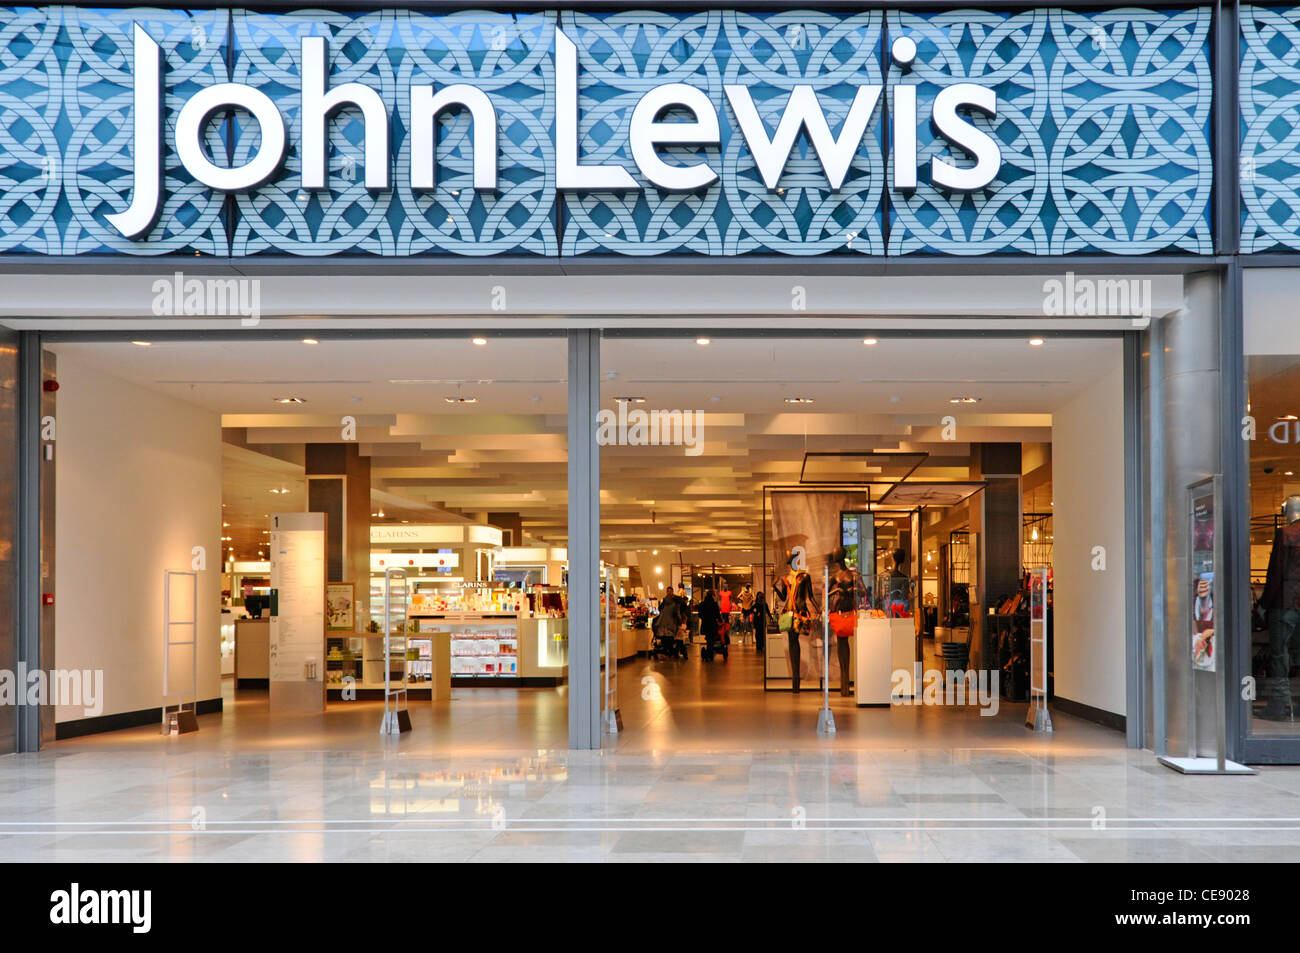 John Lewis department store entrance and interior from shopping mall at the Stratford City Westfield shopping centre Stock Photo